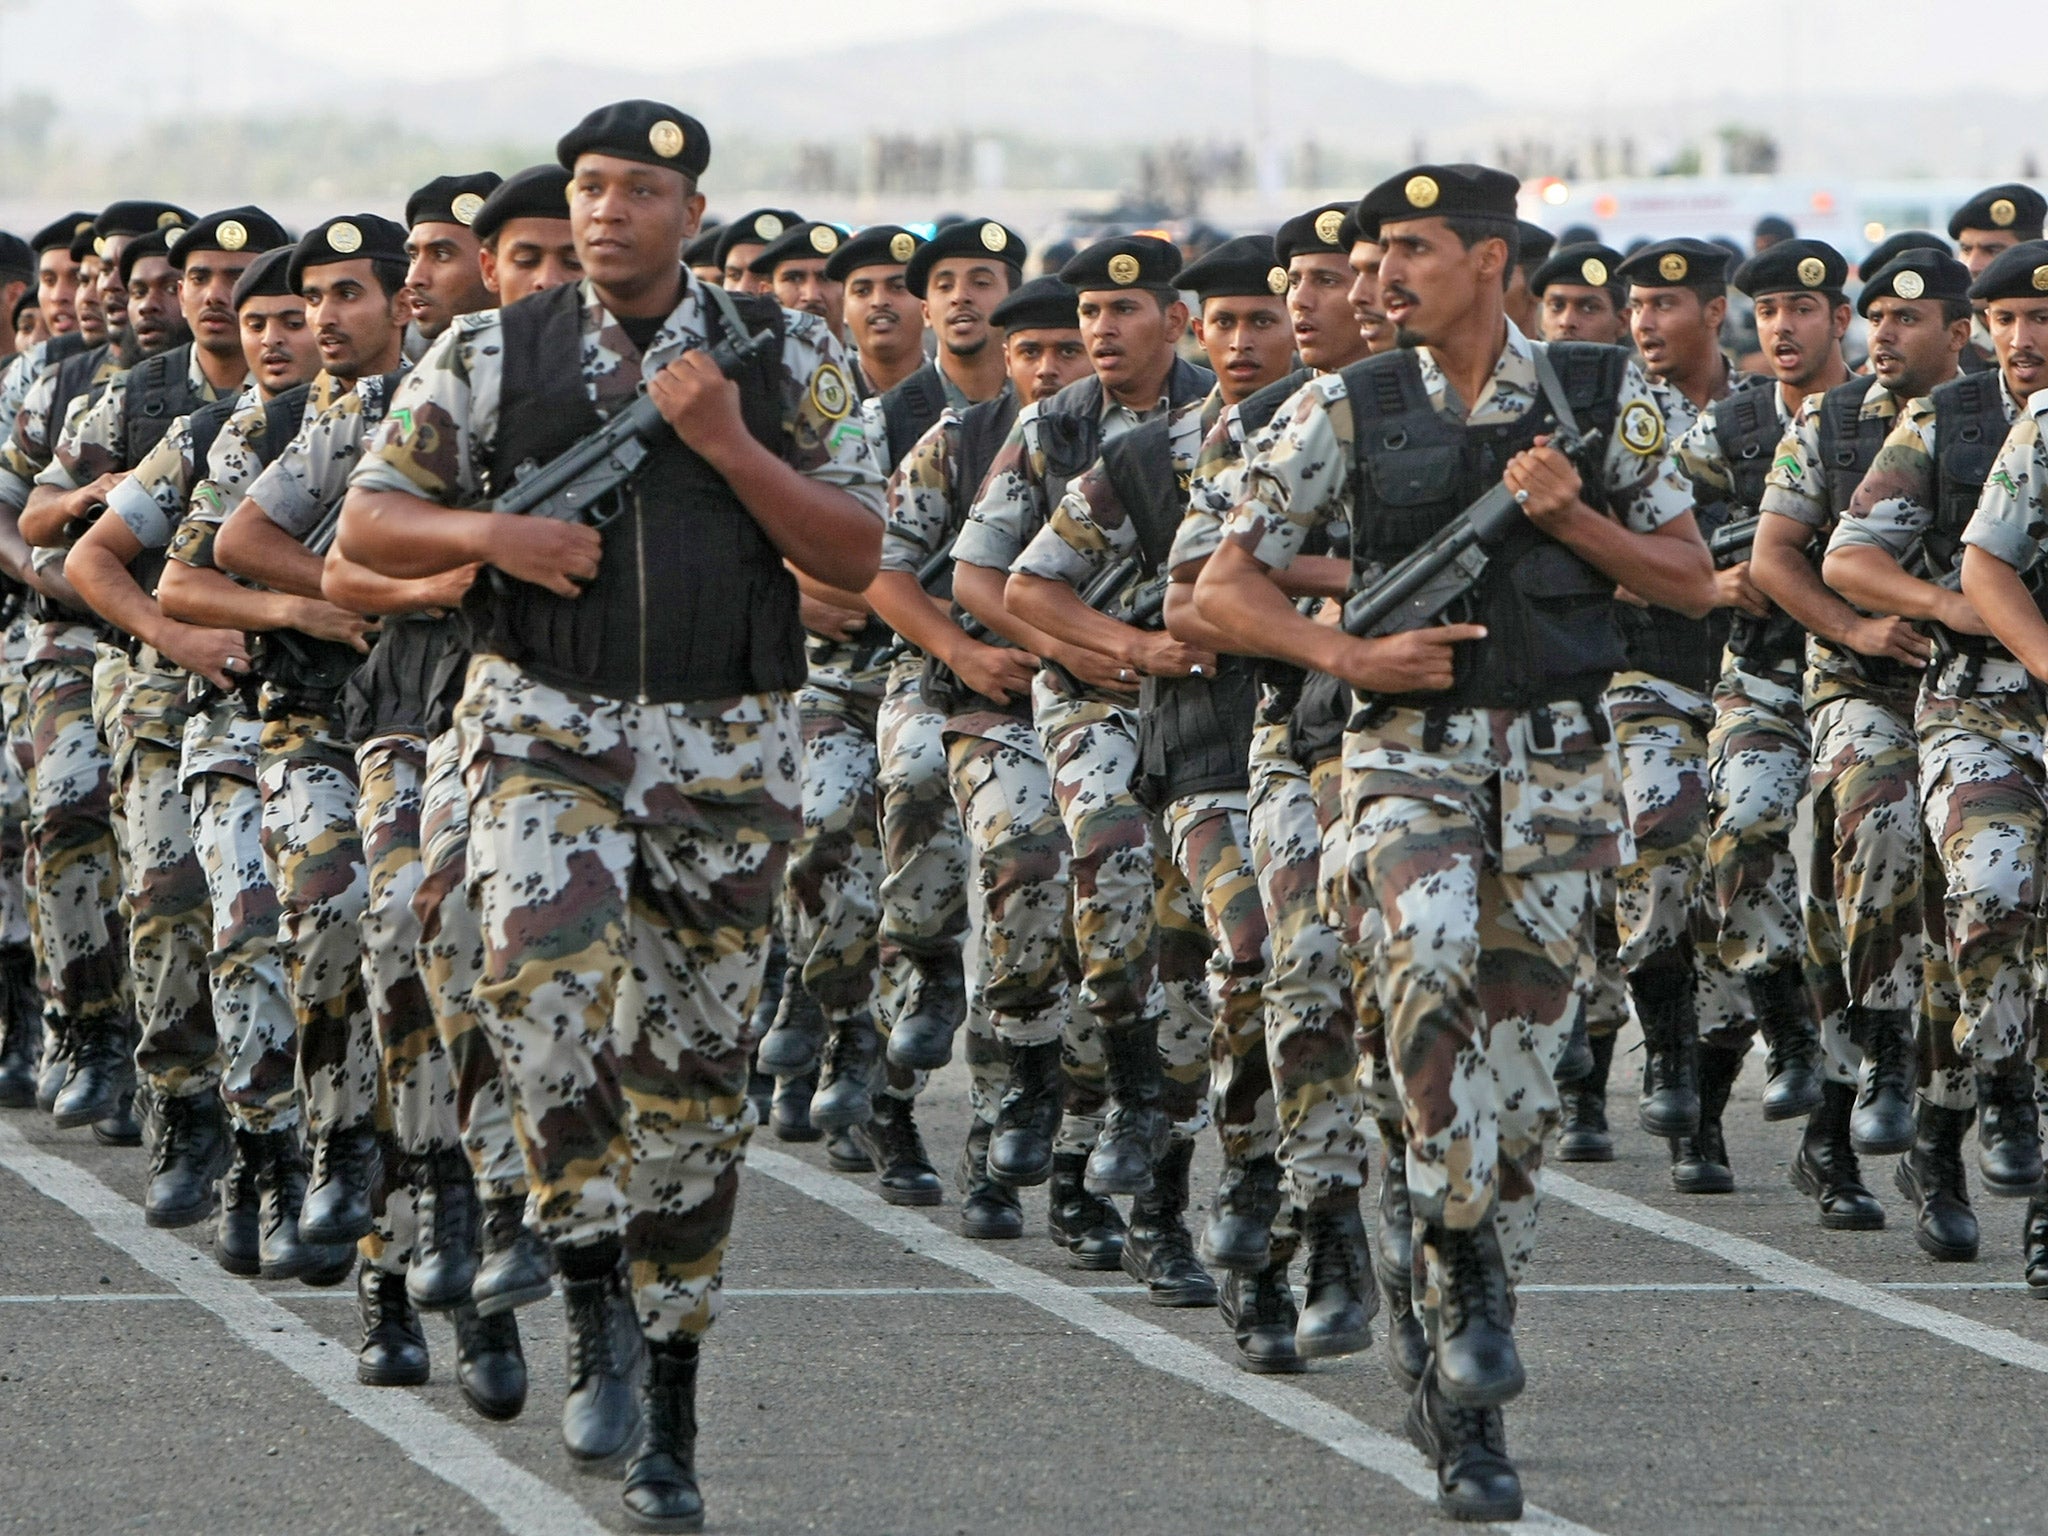 Saudi security forces march during a military parade